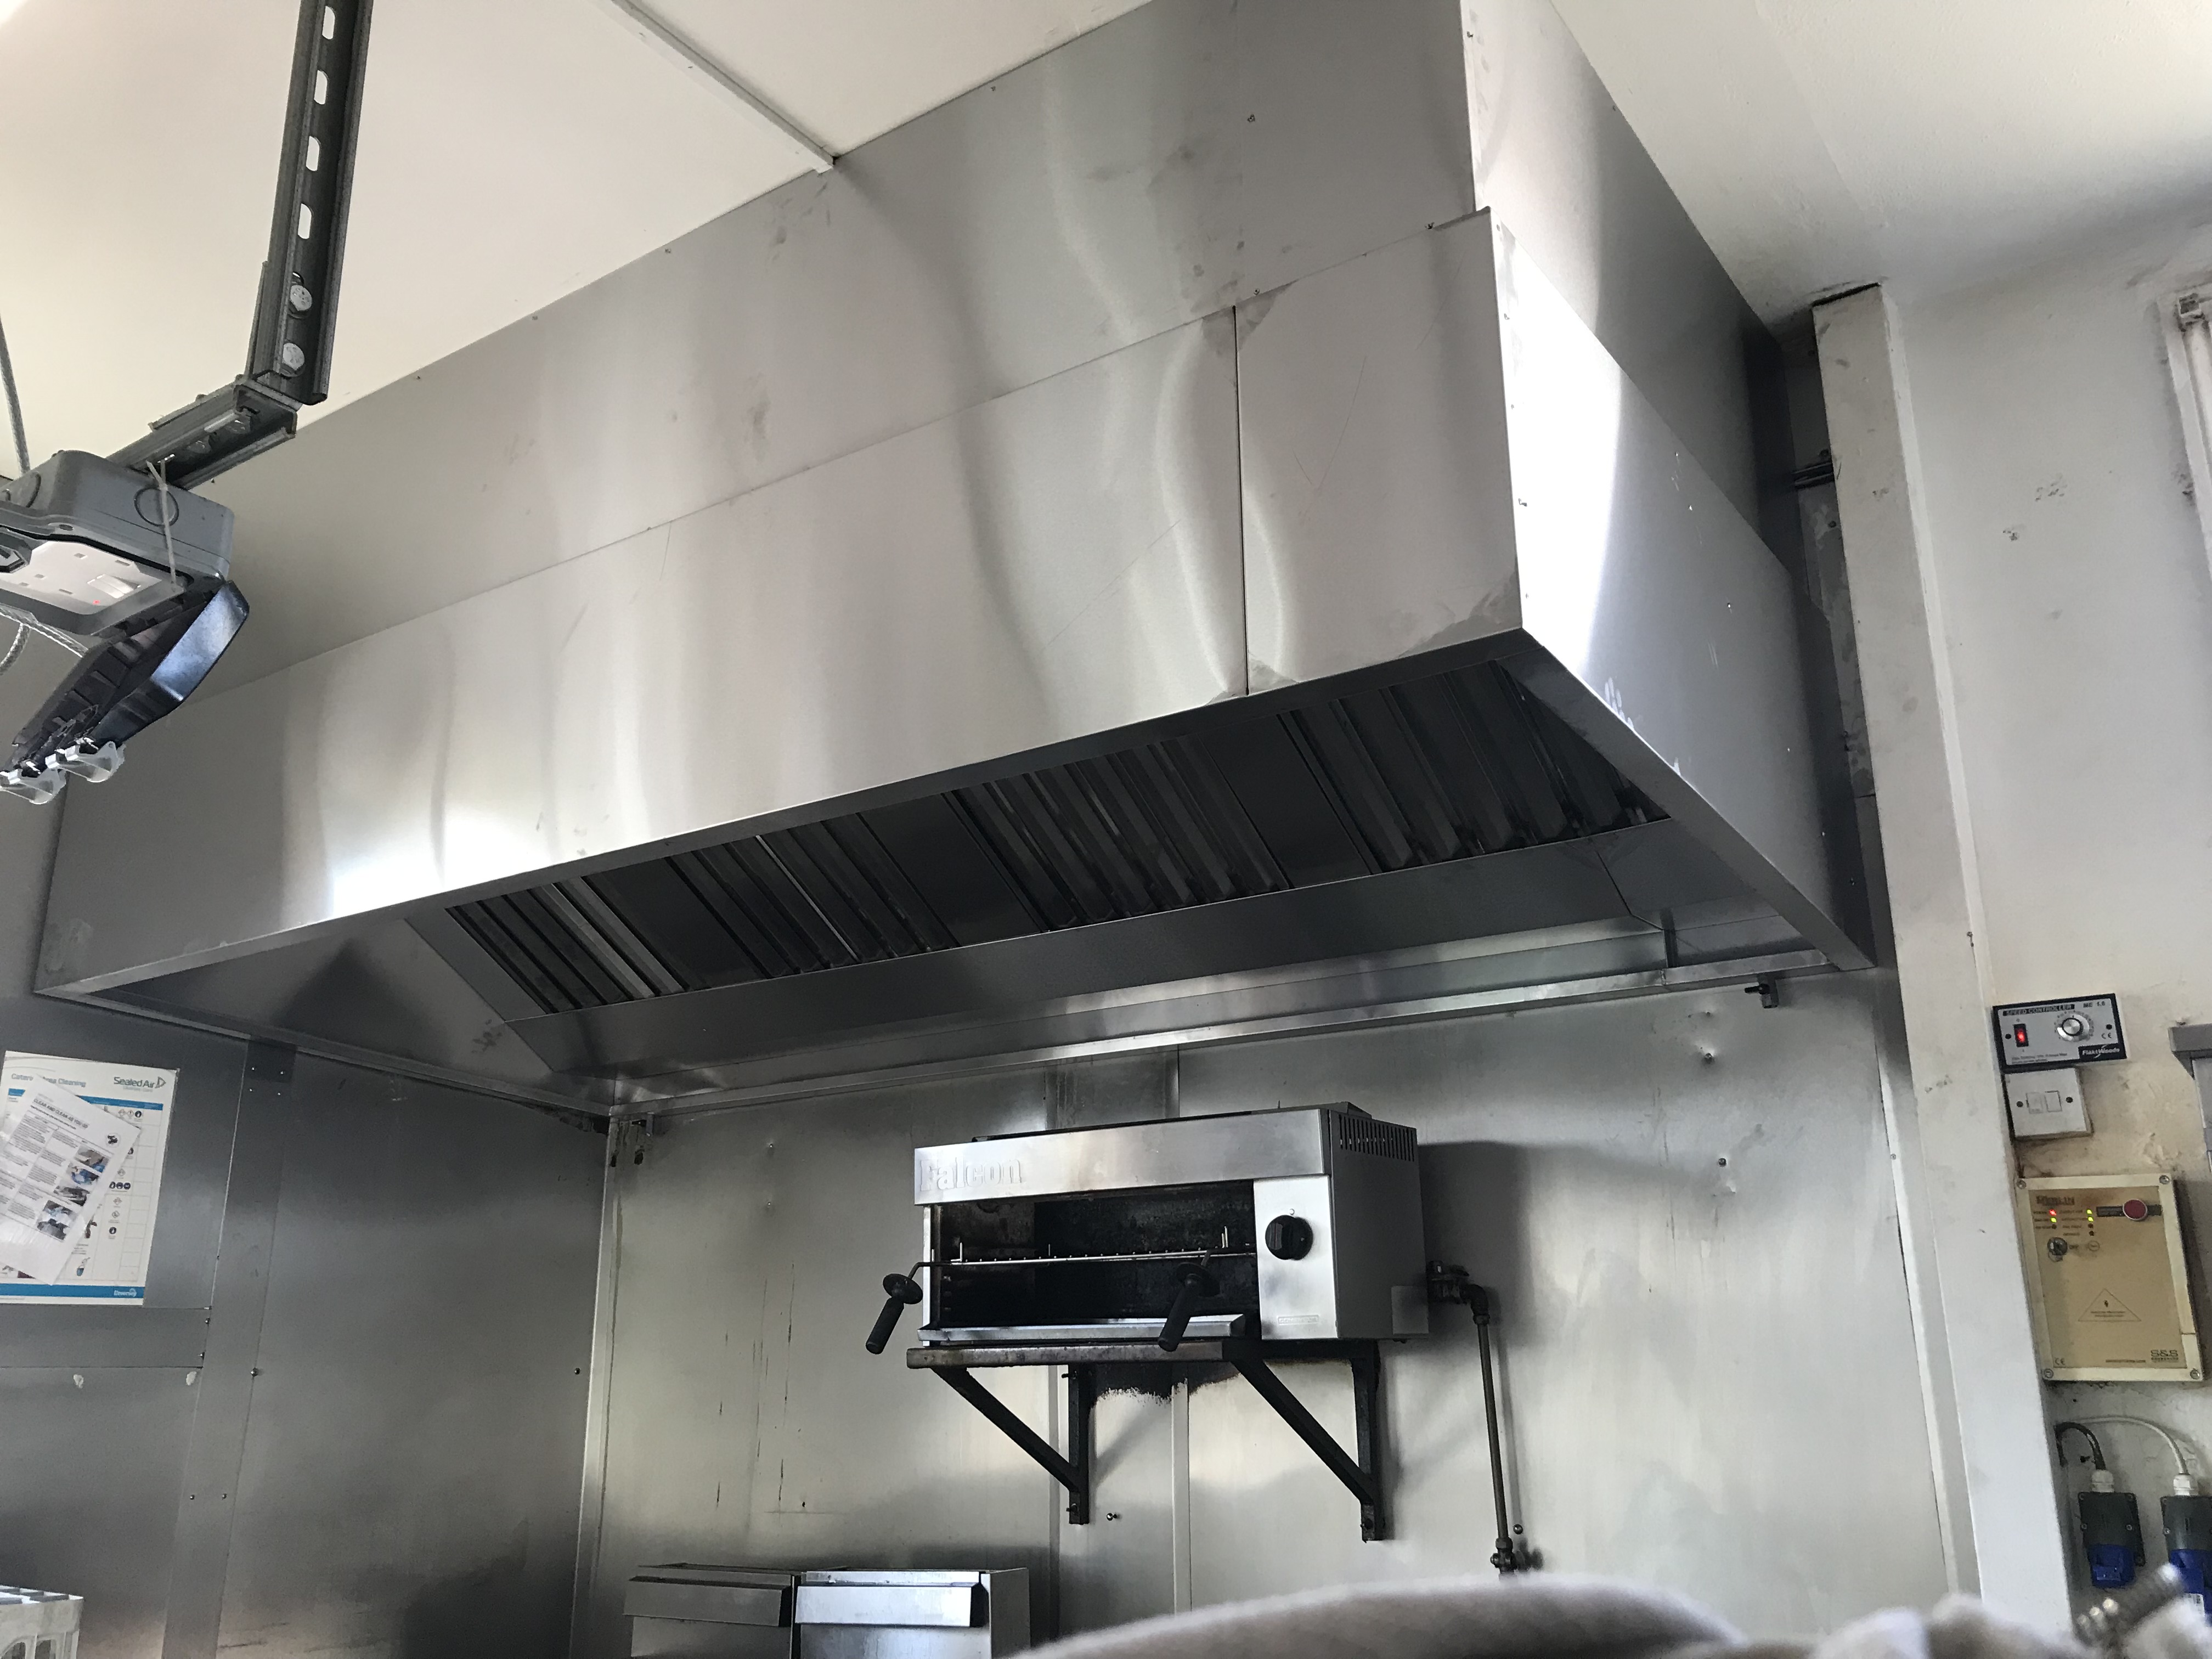 New commercial kitchen canopy fabricated and installed.